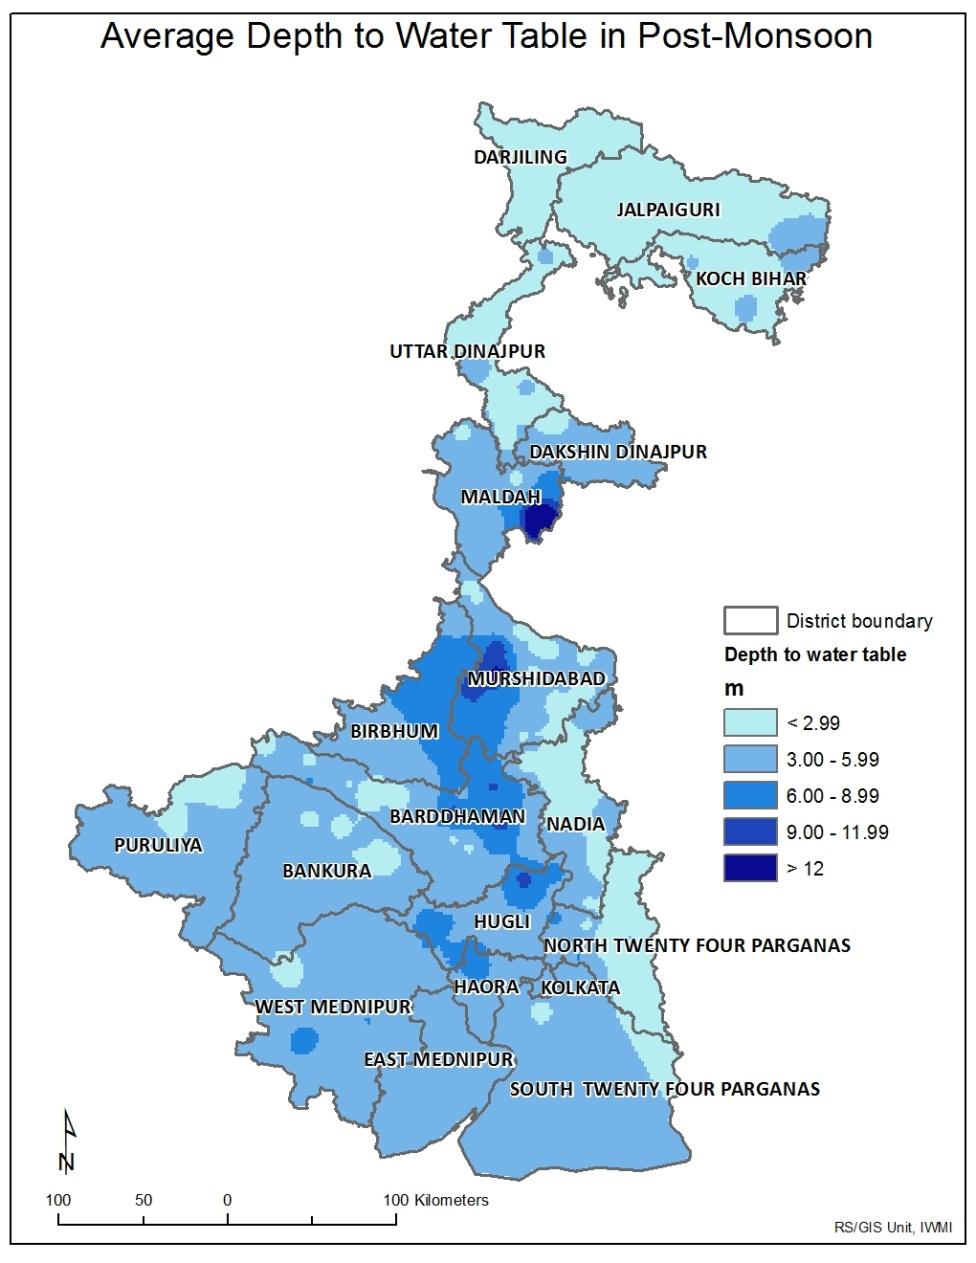 West Bengal: Alluvial aquifers, low groundwater use and high recharge Water tables recover after monsoons and average depth to water